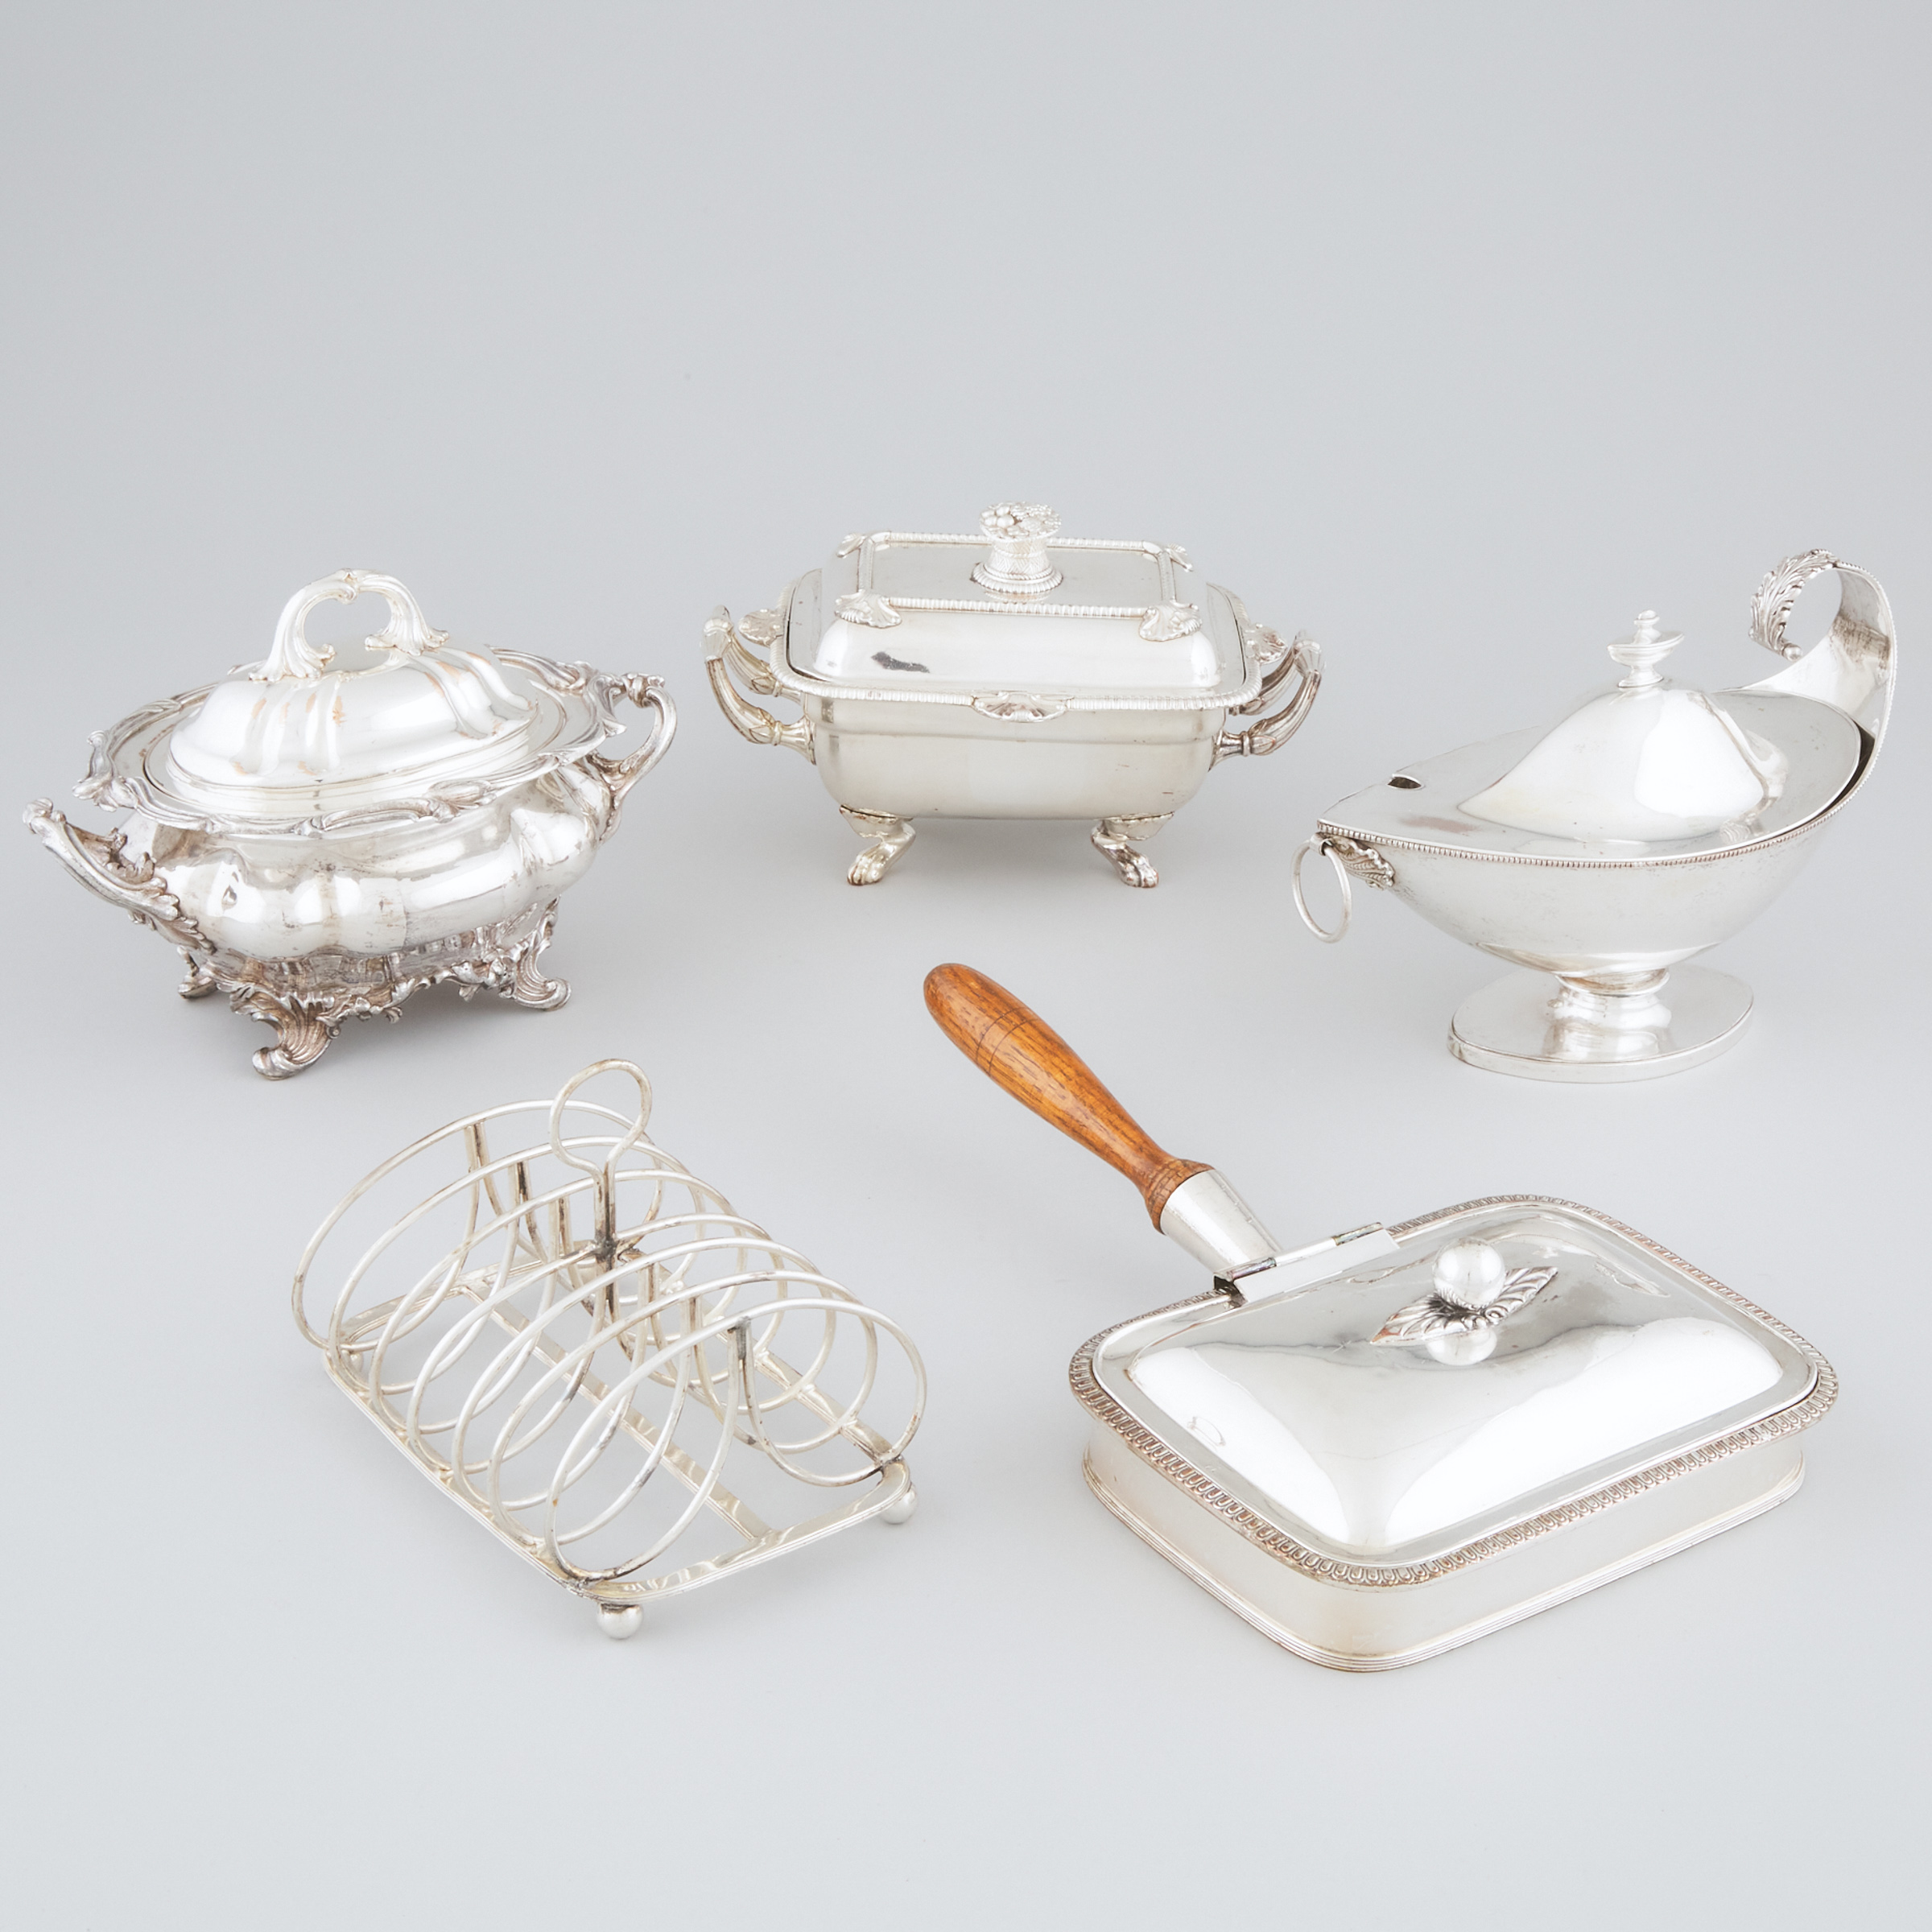 Three Old Sheffield Plate Covered Sauce Tureens, Welsh Rarebit Dish and a Toast Rack, 19th century